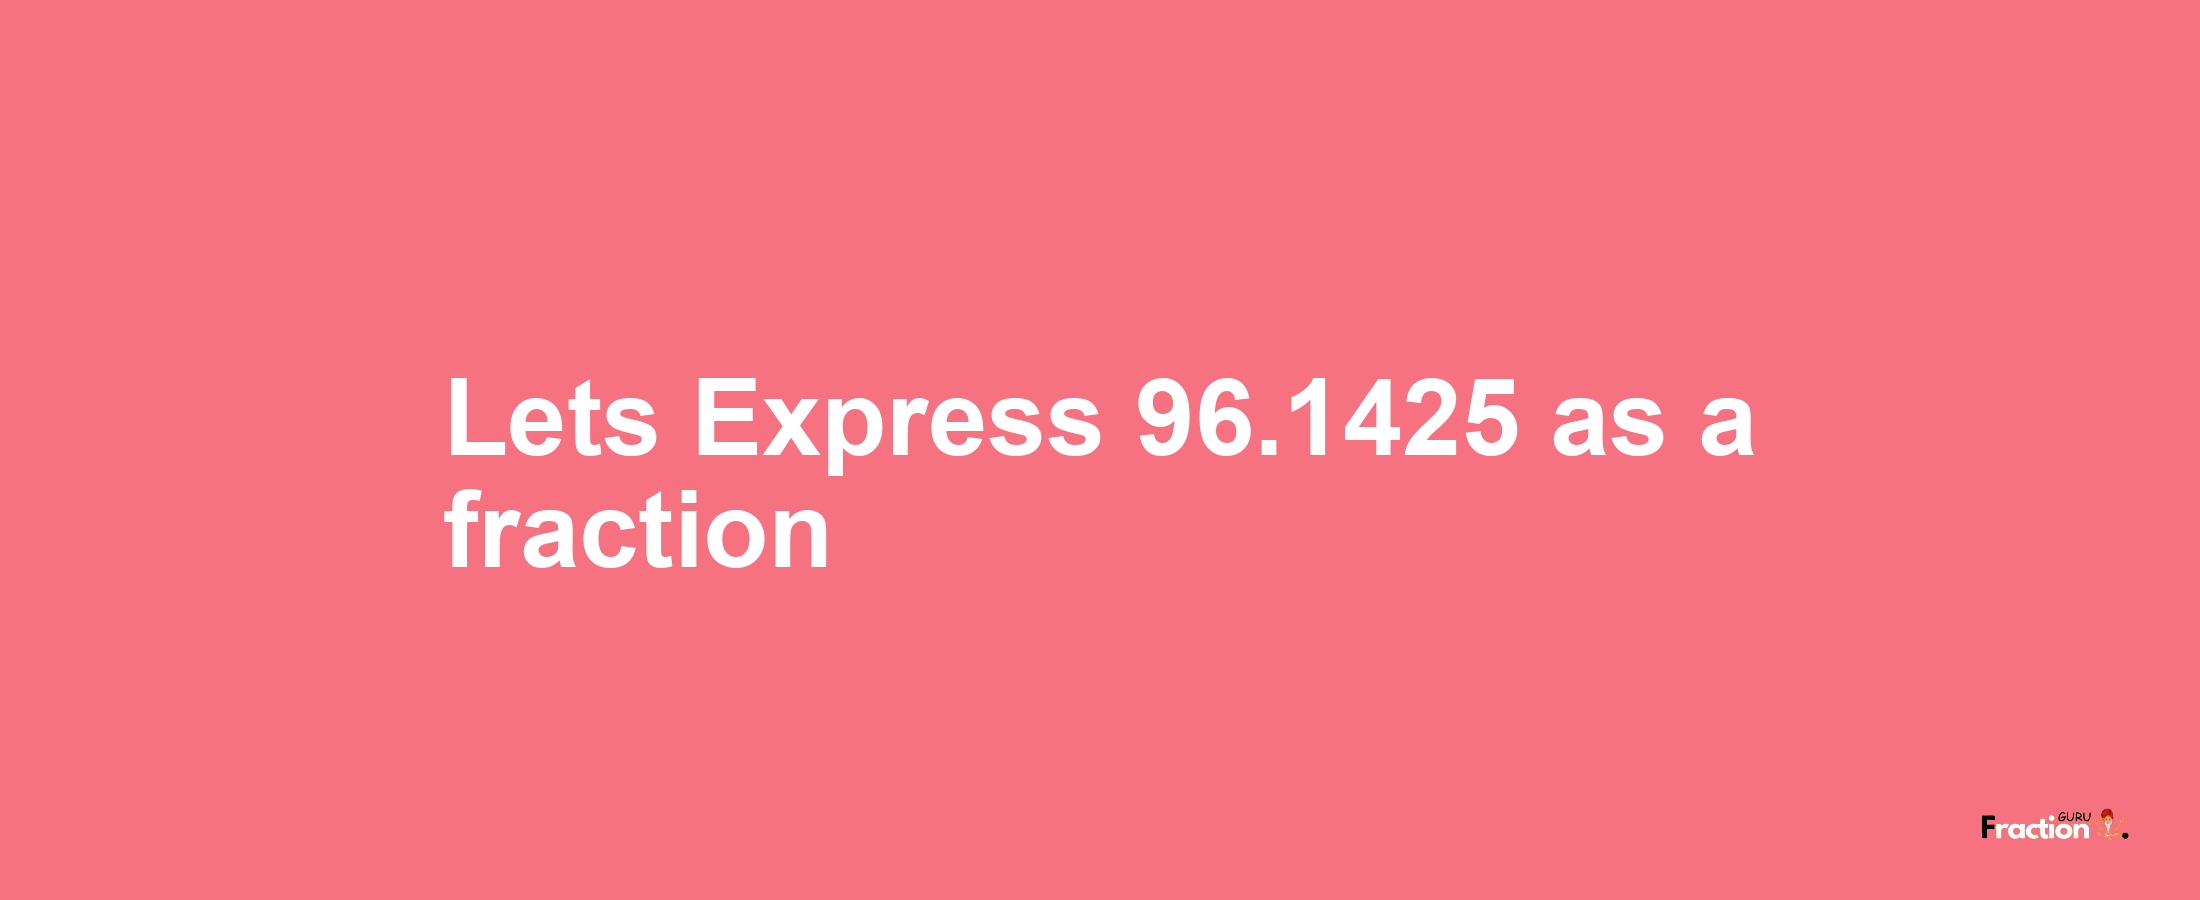 Lets Express 96.1425 as afraction